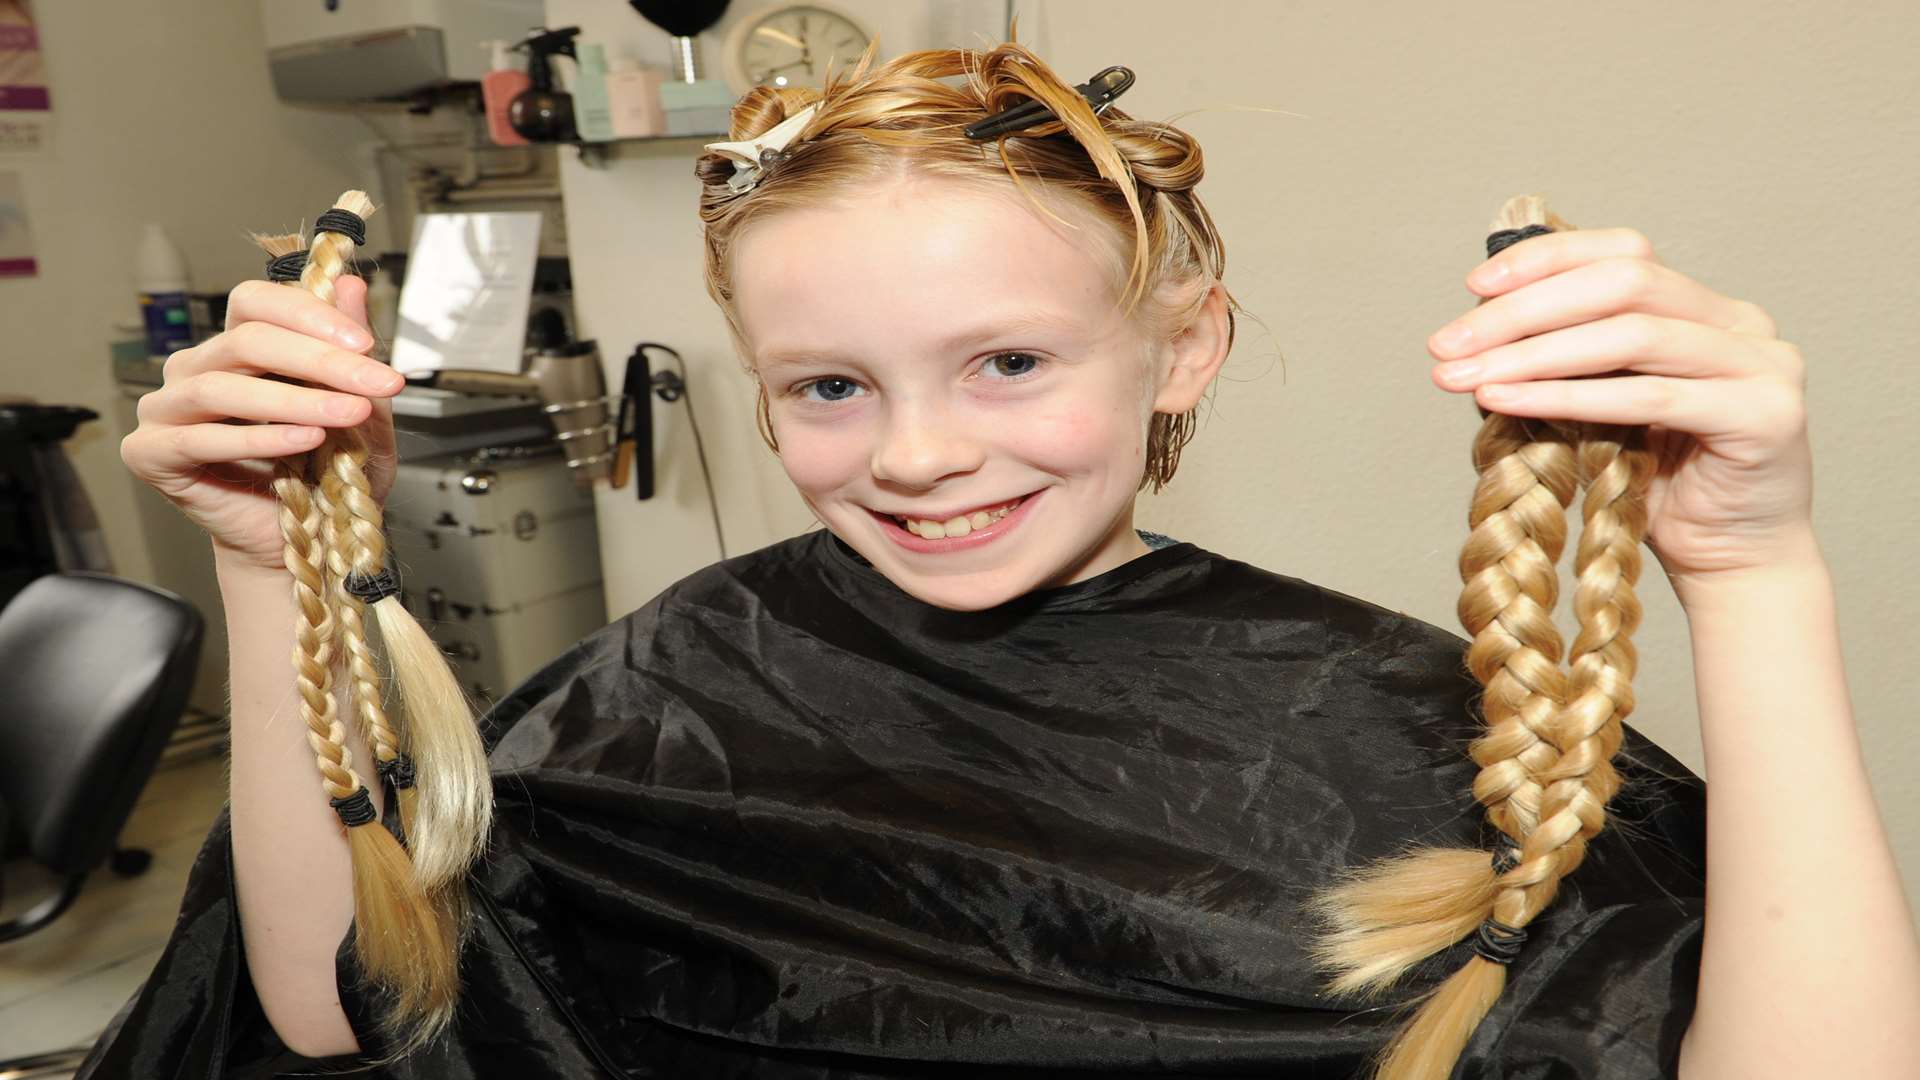 Isabel Christian had her long hair cut off to raise money for Medway Street Angels